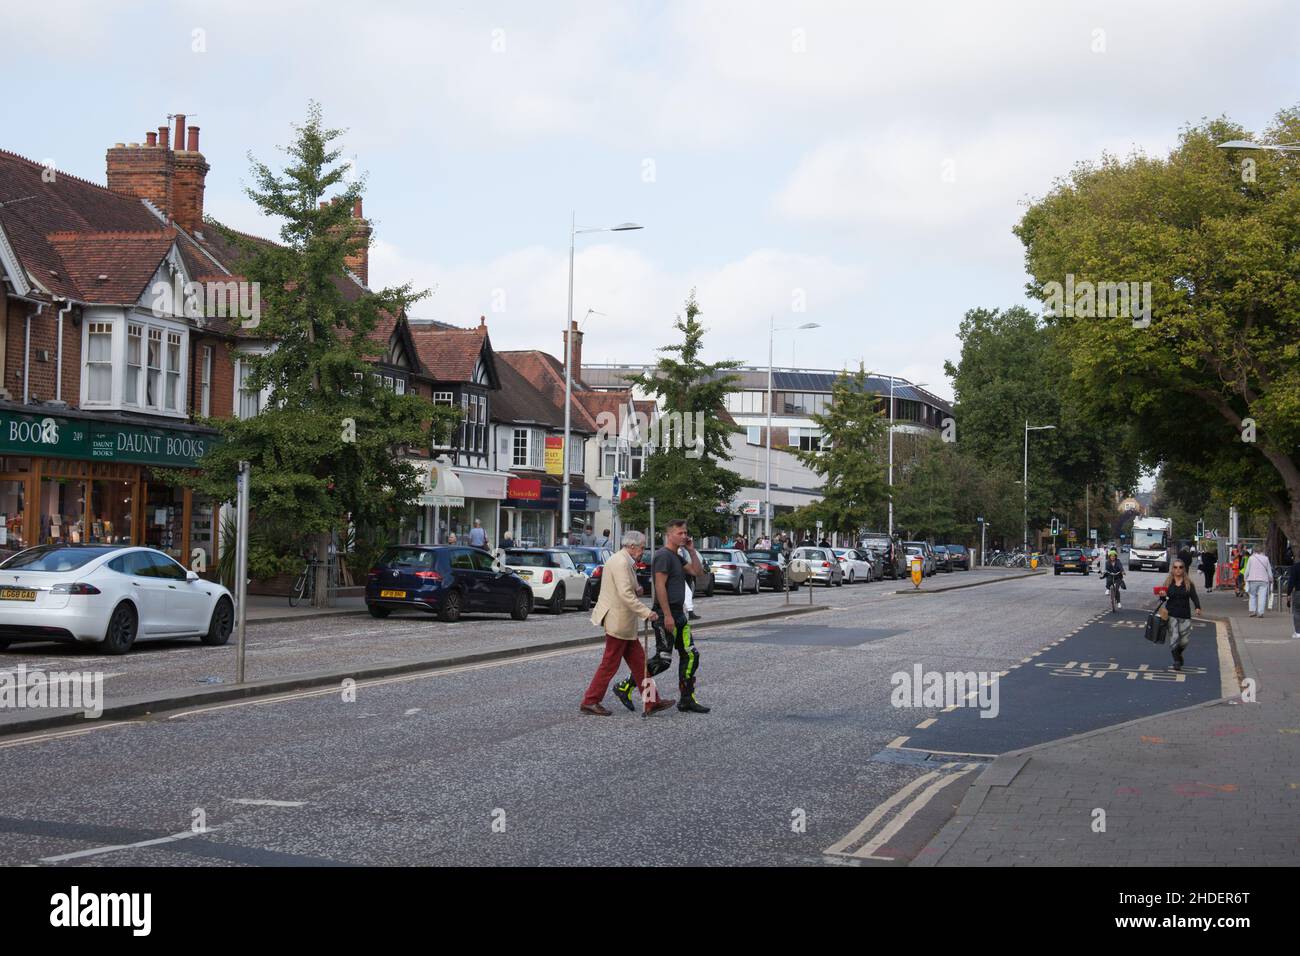 Shoppers on the Banbury Road in Summertown, Oxford in the UK Stock Photo